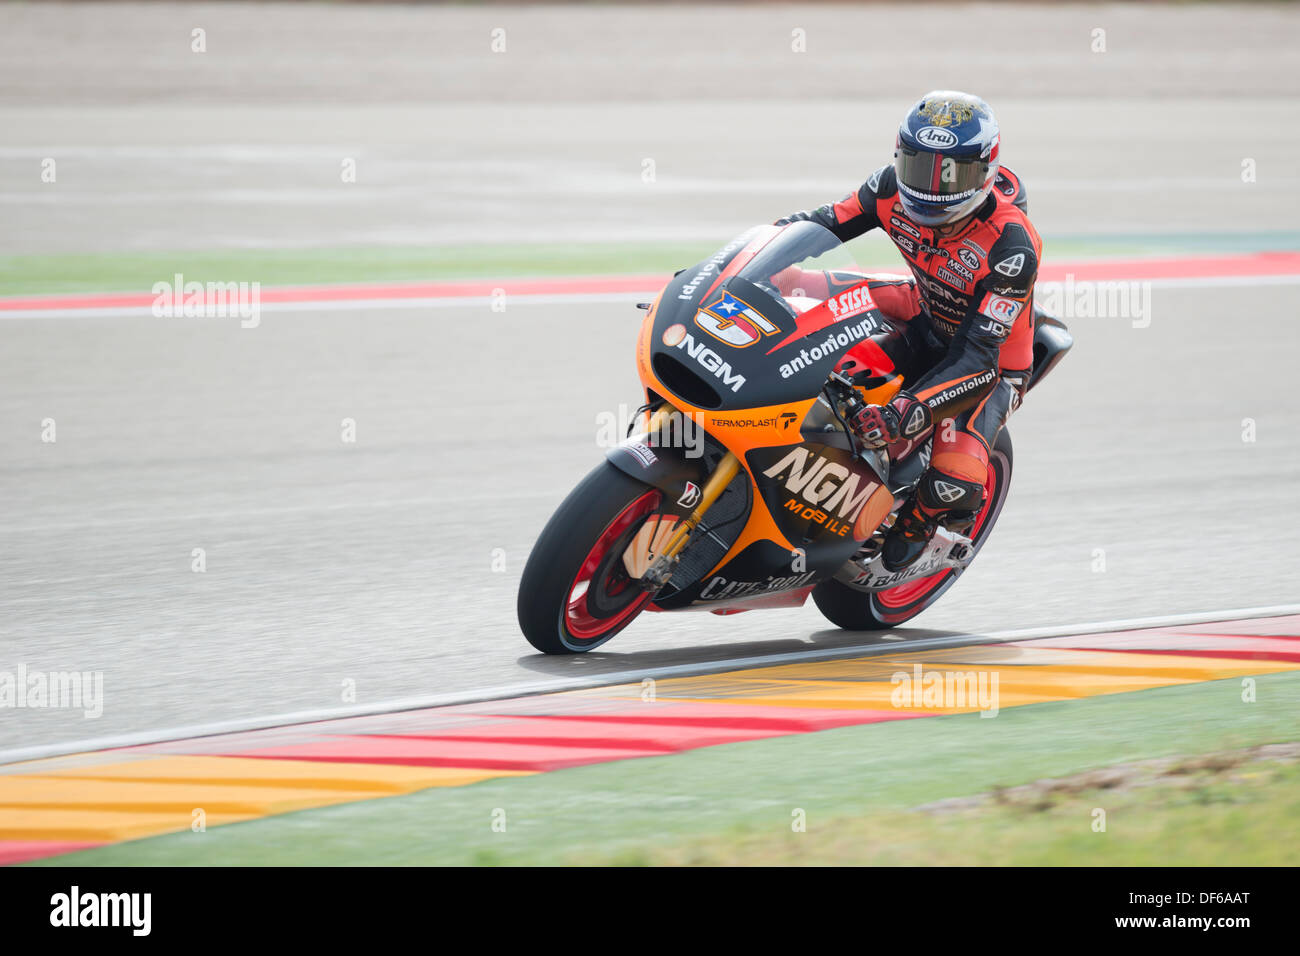 American rider, Colin Edwards, tries to get a good result in qulifying 1 in Aragon Motogp grand prix (MotoGp), in Alcañiz circuit, Spain on september 28th, 2013 NGM Mobile Forward Racing rider Colin Edwards has finished 7th (19) in qualifiyin in Alcañiz Circuit, Teruel, Spain. Stock Photo